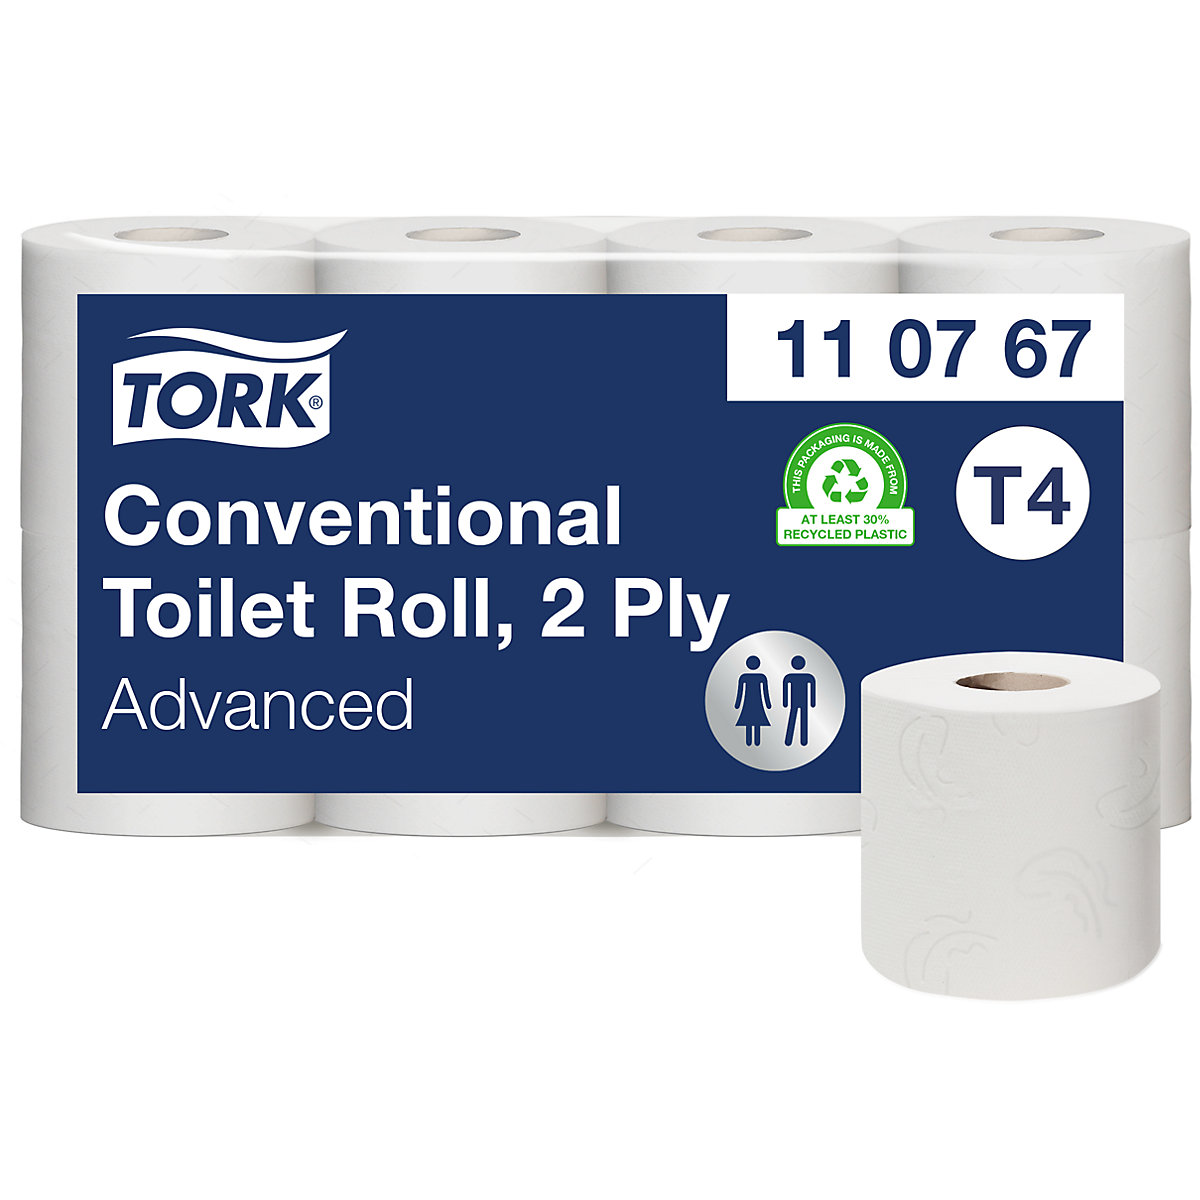 Small rolls of toilet paper, household roll - TORK